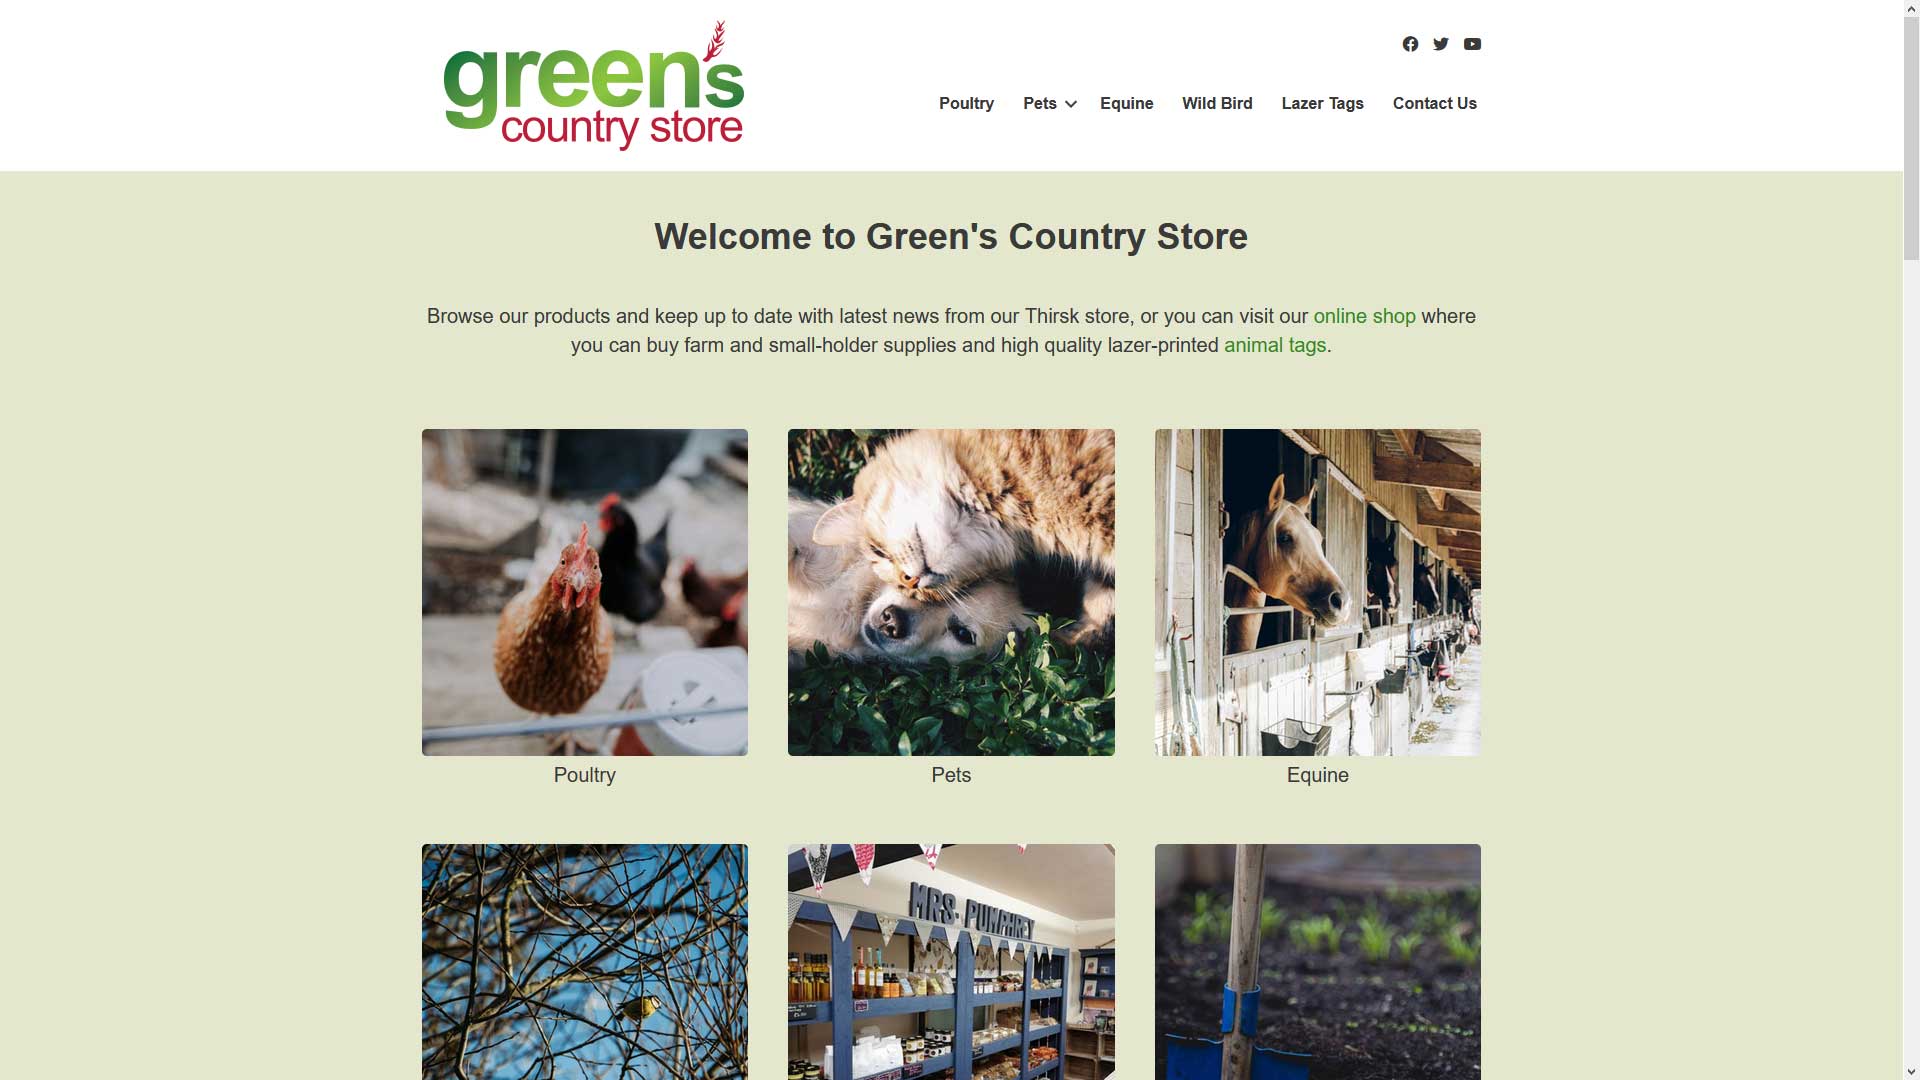 Green's Country Store